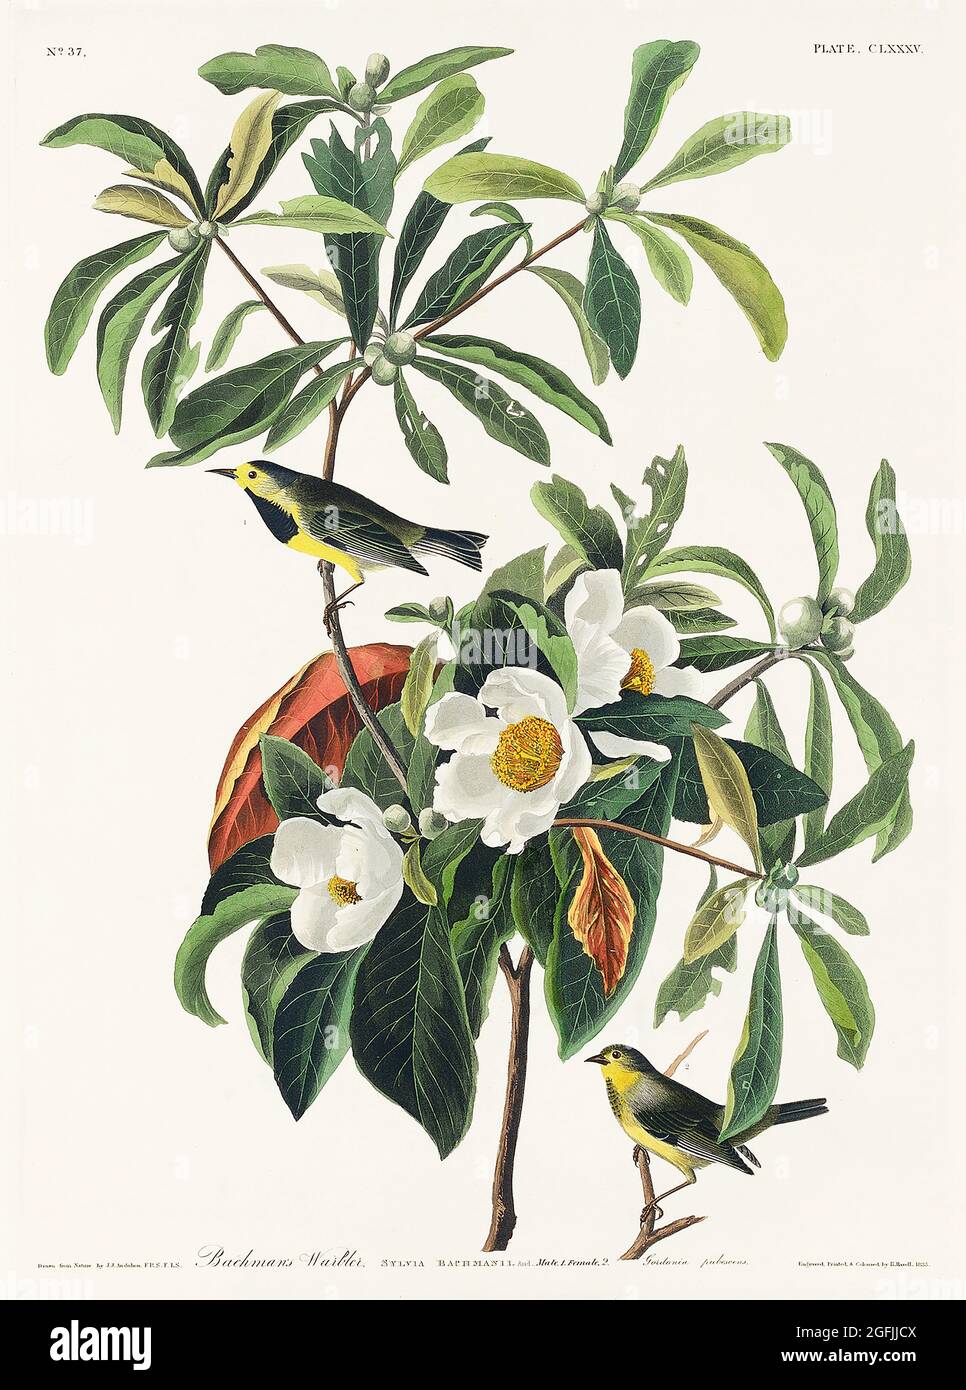 Bachman's Warbler from Birds of America (1827) by John James Audubon (1785 - 1851), etched by Robert Havell Stock Photo